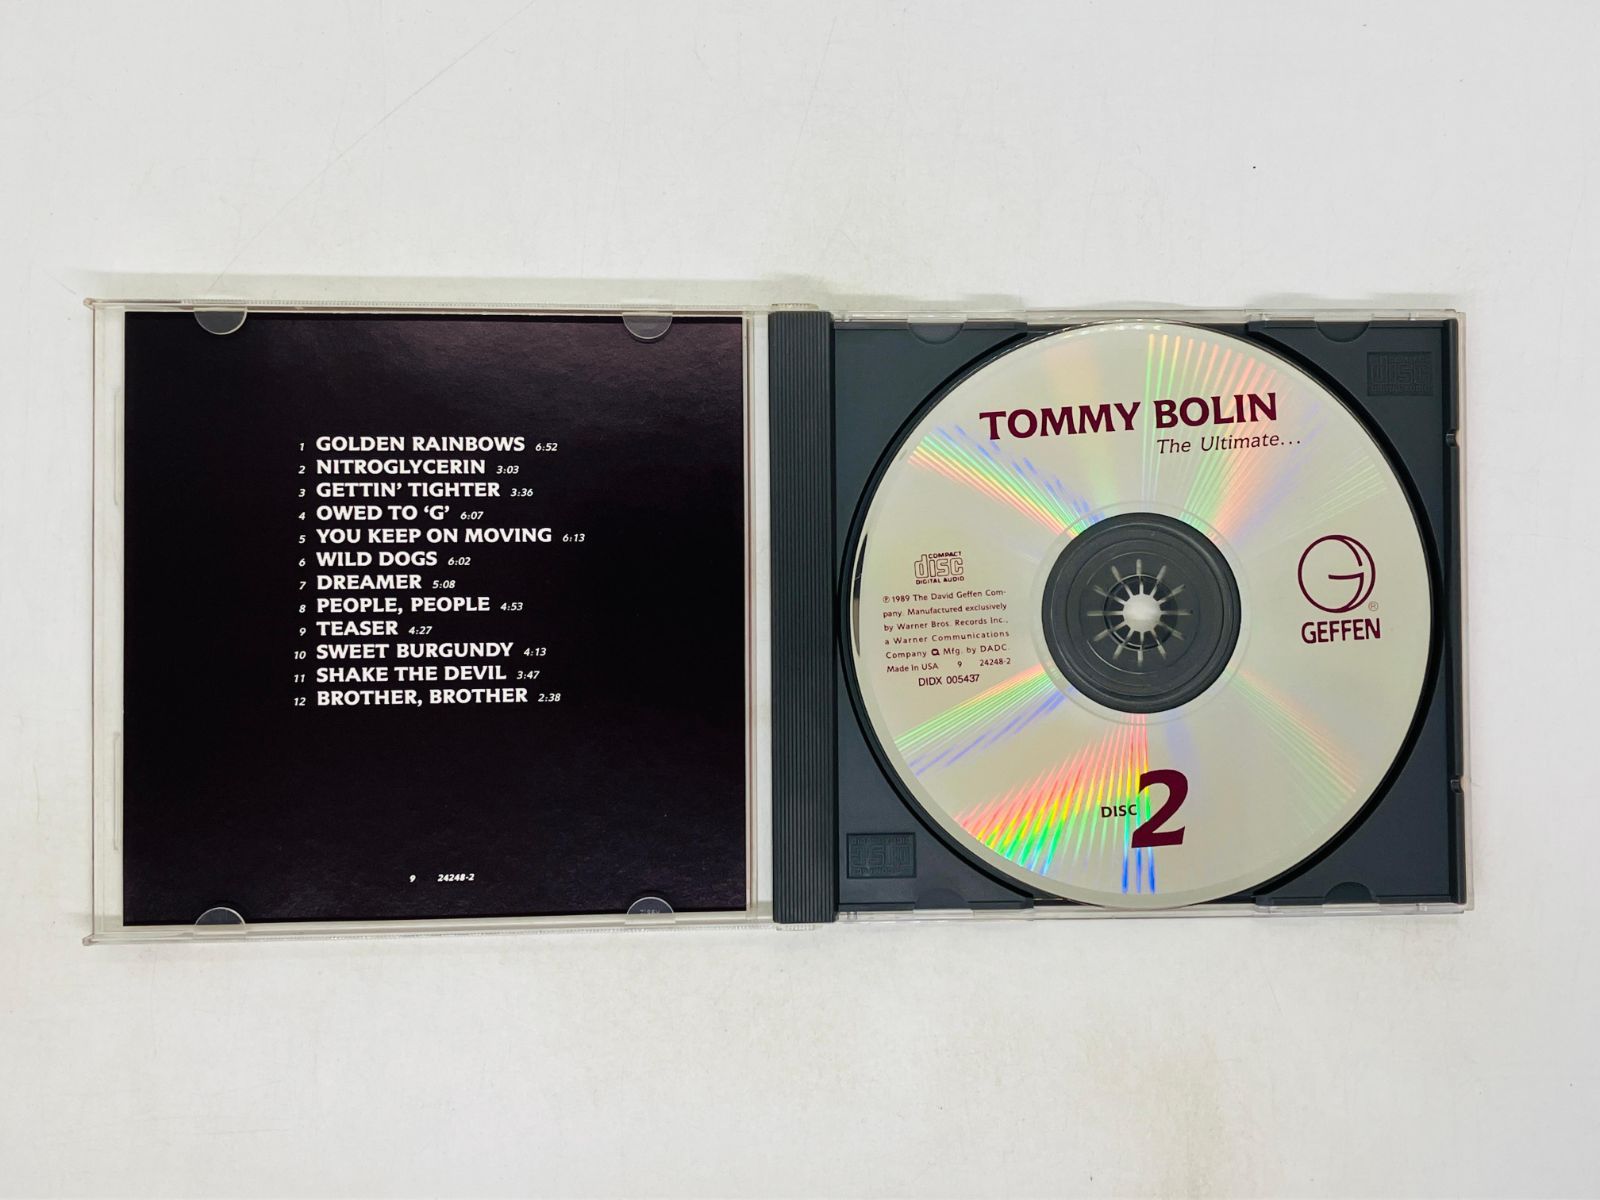 CD TOMMY BOLIN The Ultimate Disc 2 / トミー・ボーリン / アルバム Z02 - メルカリ